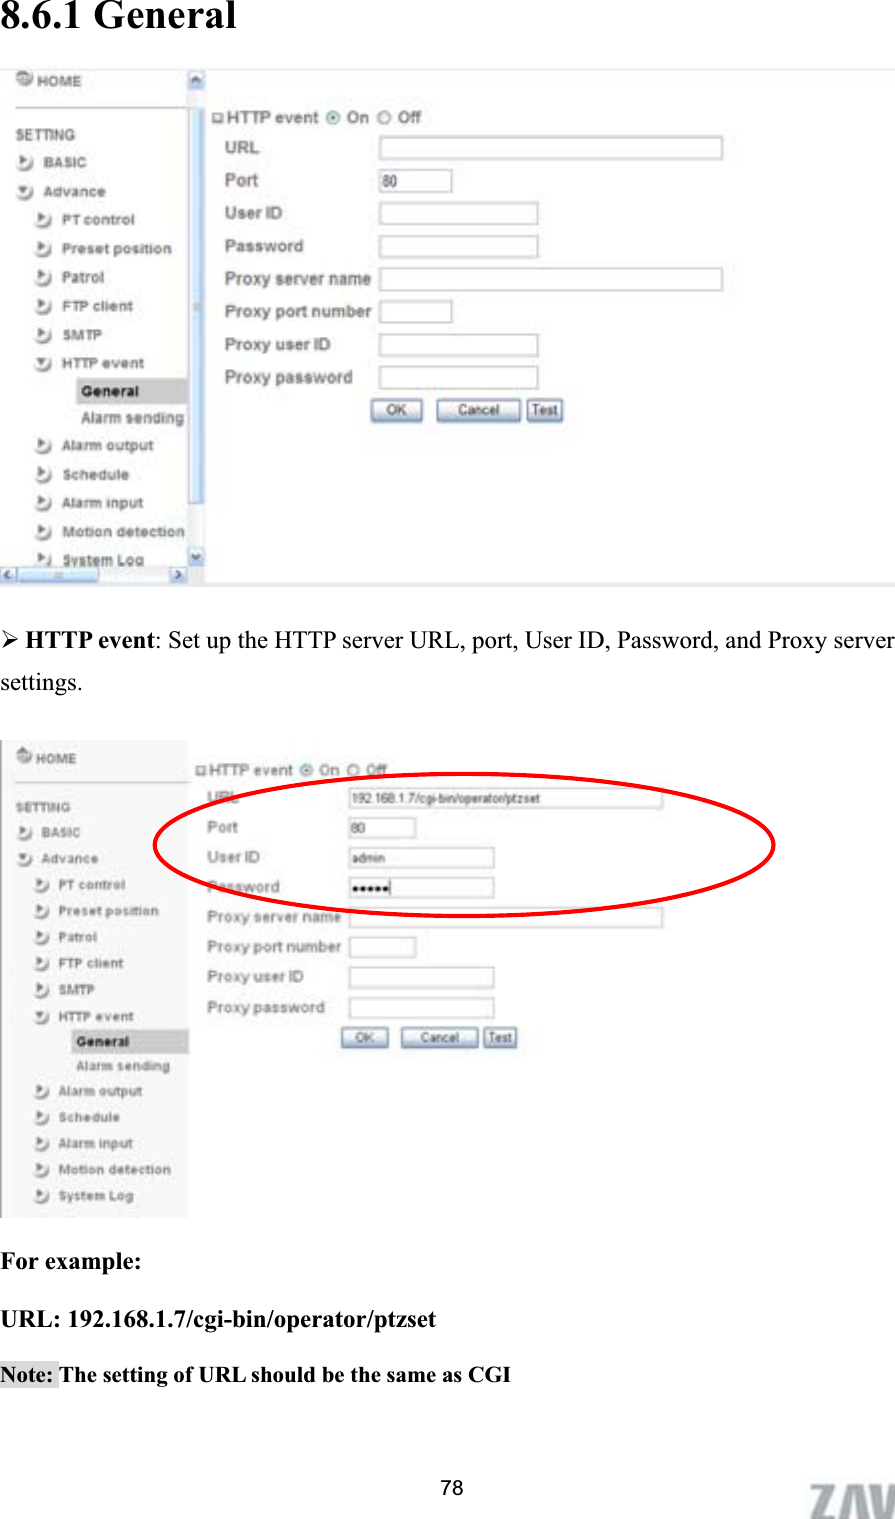      8.6.1 General     ¾HTTP event: Set up the HTTP server URL, port, User ID, Password, and Proxy server settings.For example: URL: 192.168.1.7/cgi-bin/operator/ptzset 78Note: The setting of URL should be the same as CGI